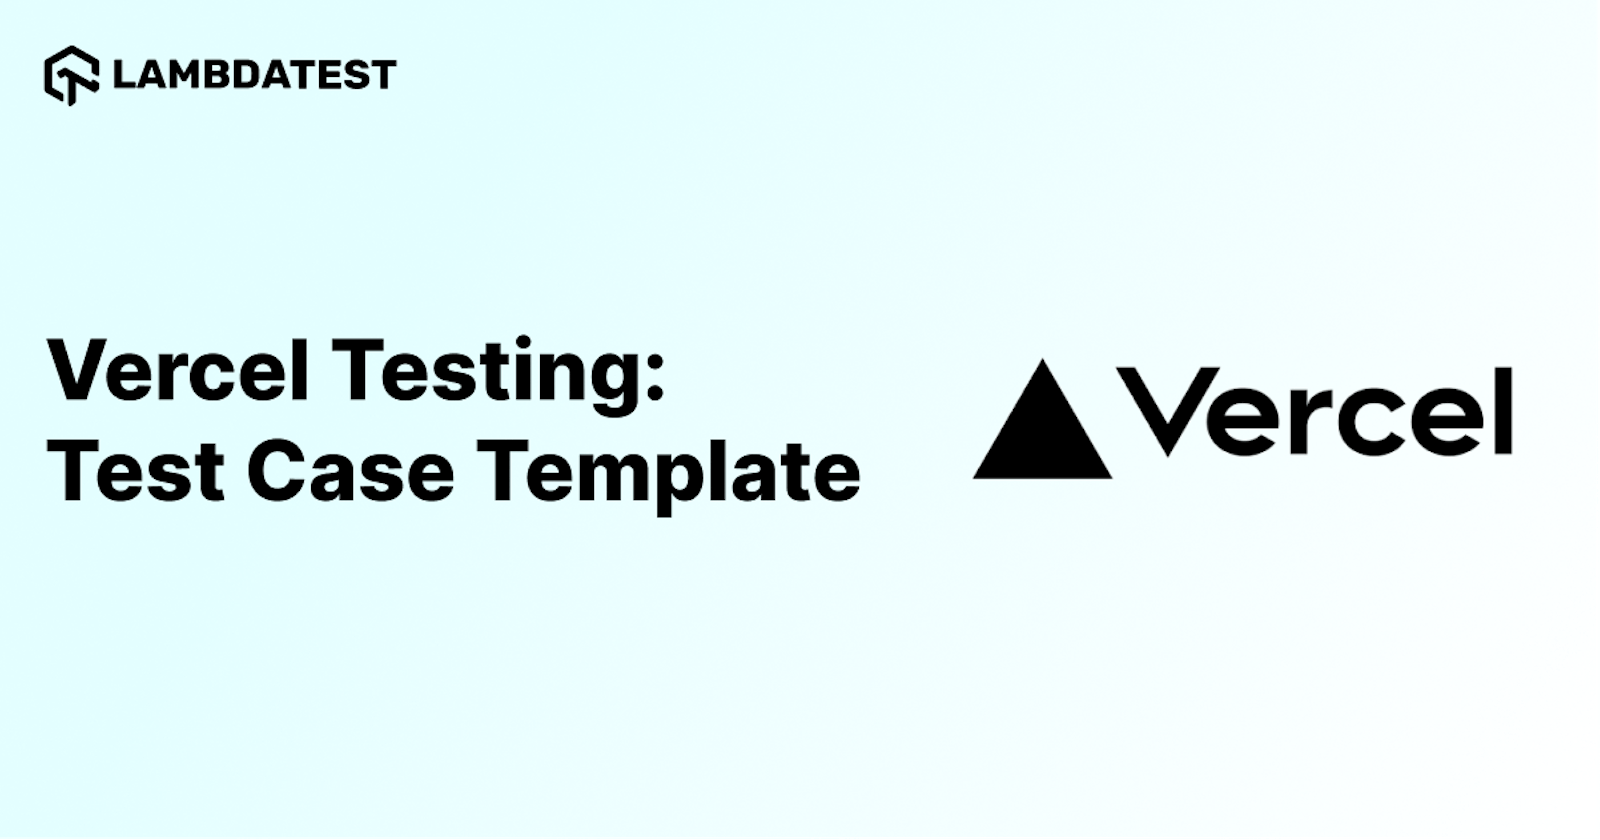 45 Test Cases: Guide to Vercel Testing Templates